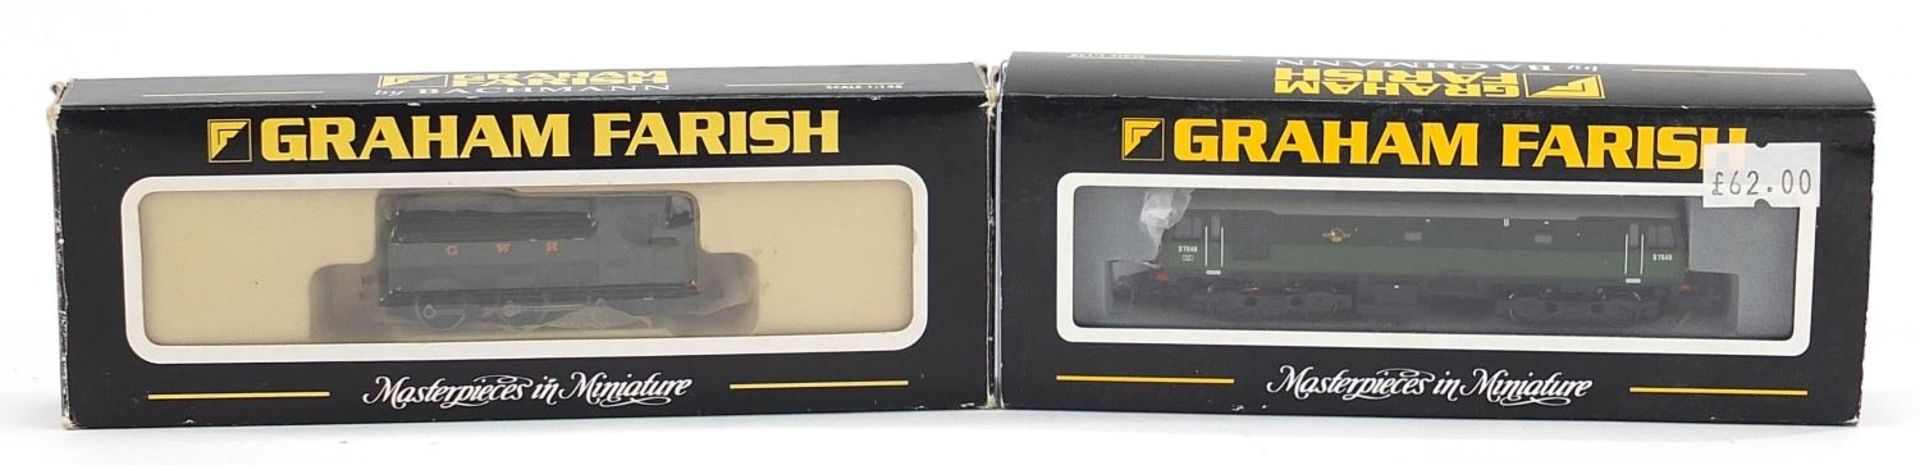 Two Graham Farish N gauge model railway locomotives with cases and boxes by Bachmann comprising